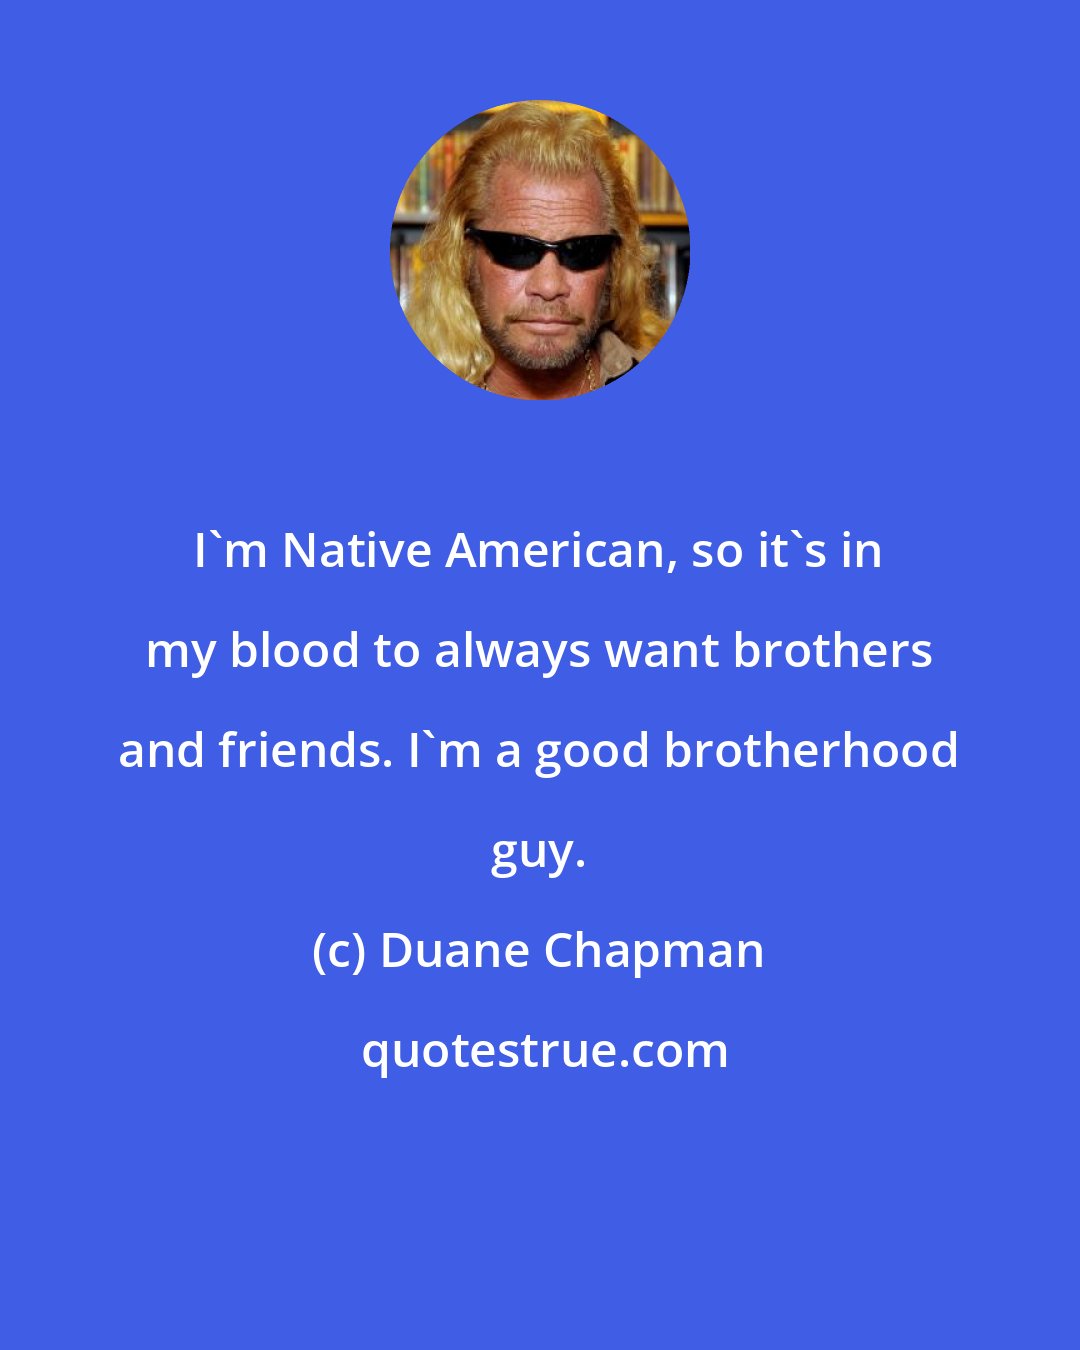 Duane Chapman: I'm Native American, so it's in my blood to always want brothers and friends. I'm a good brotherhood guy.